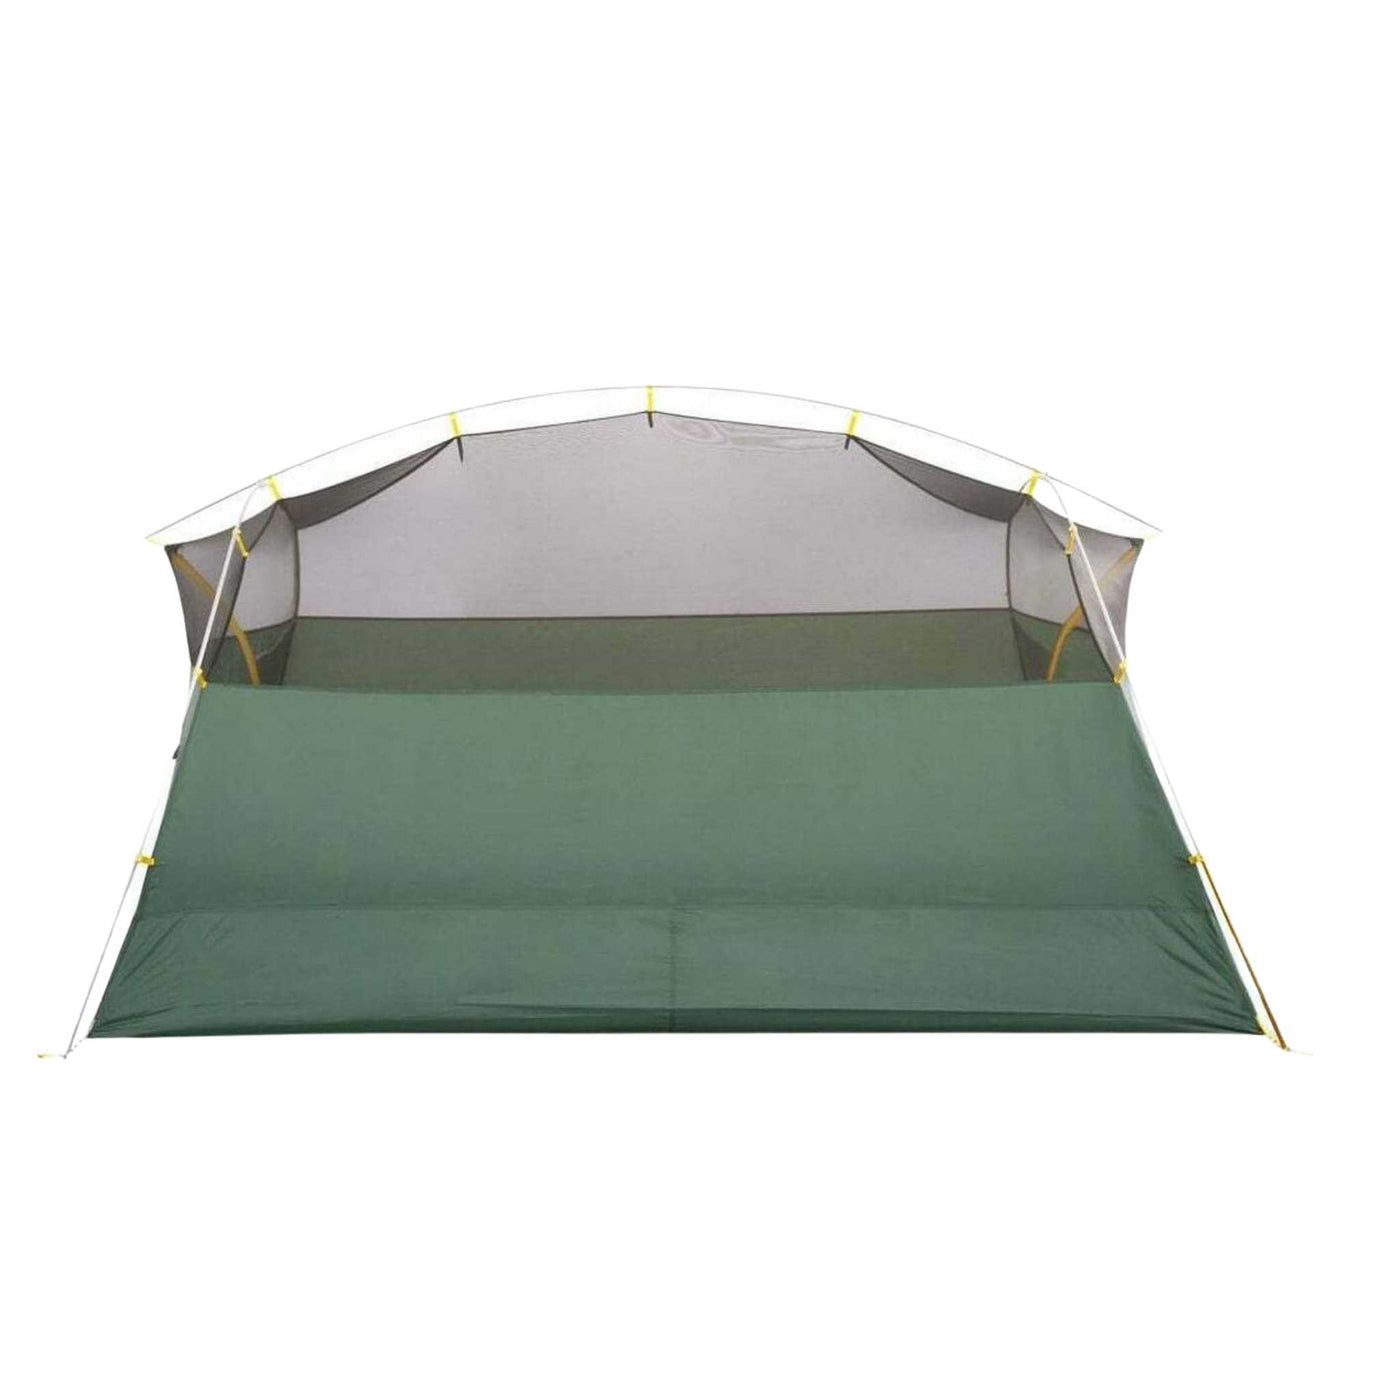 Sierra Designs Clearwing 3000 3 Person Tent | Tramping 3 Person Backpacking Tent | Further Faster Christchurch NZ #green-sd